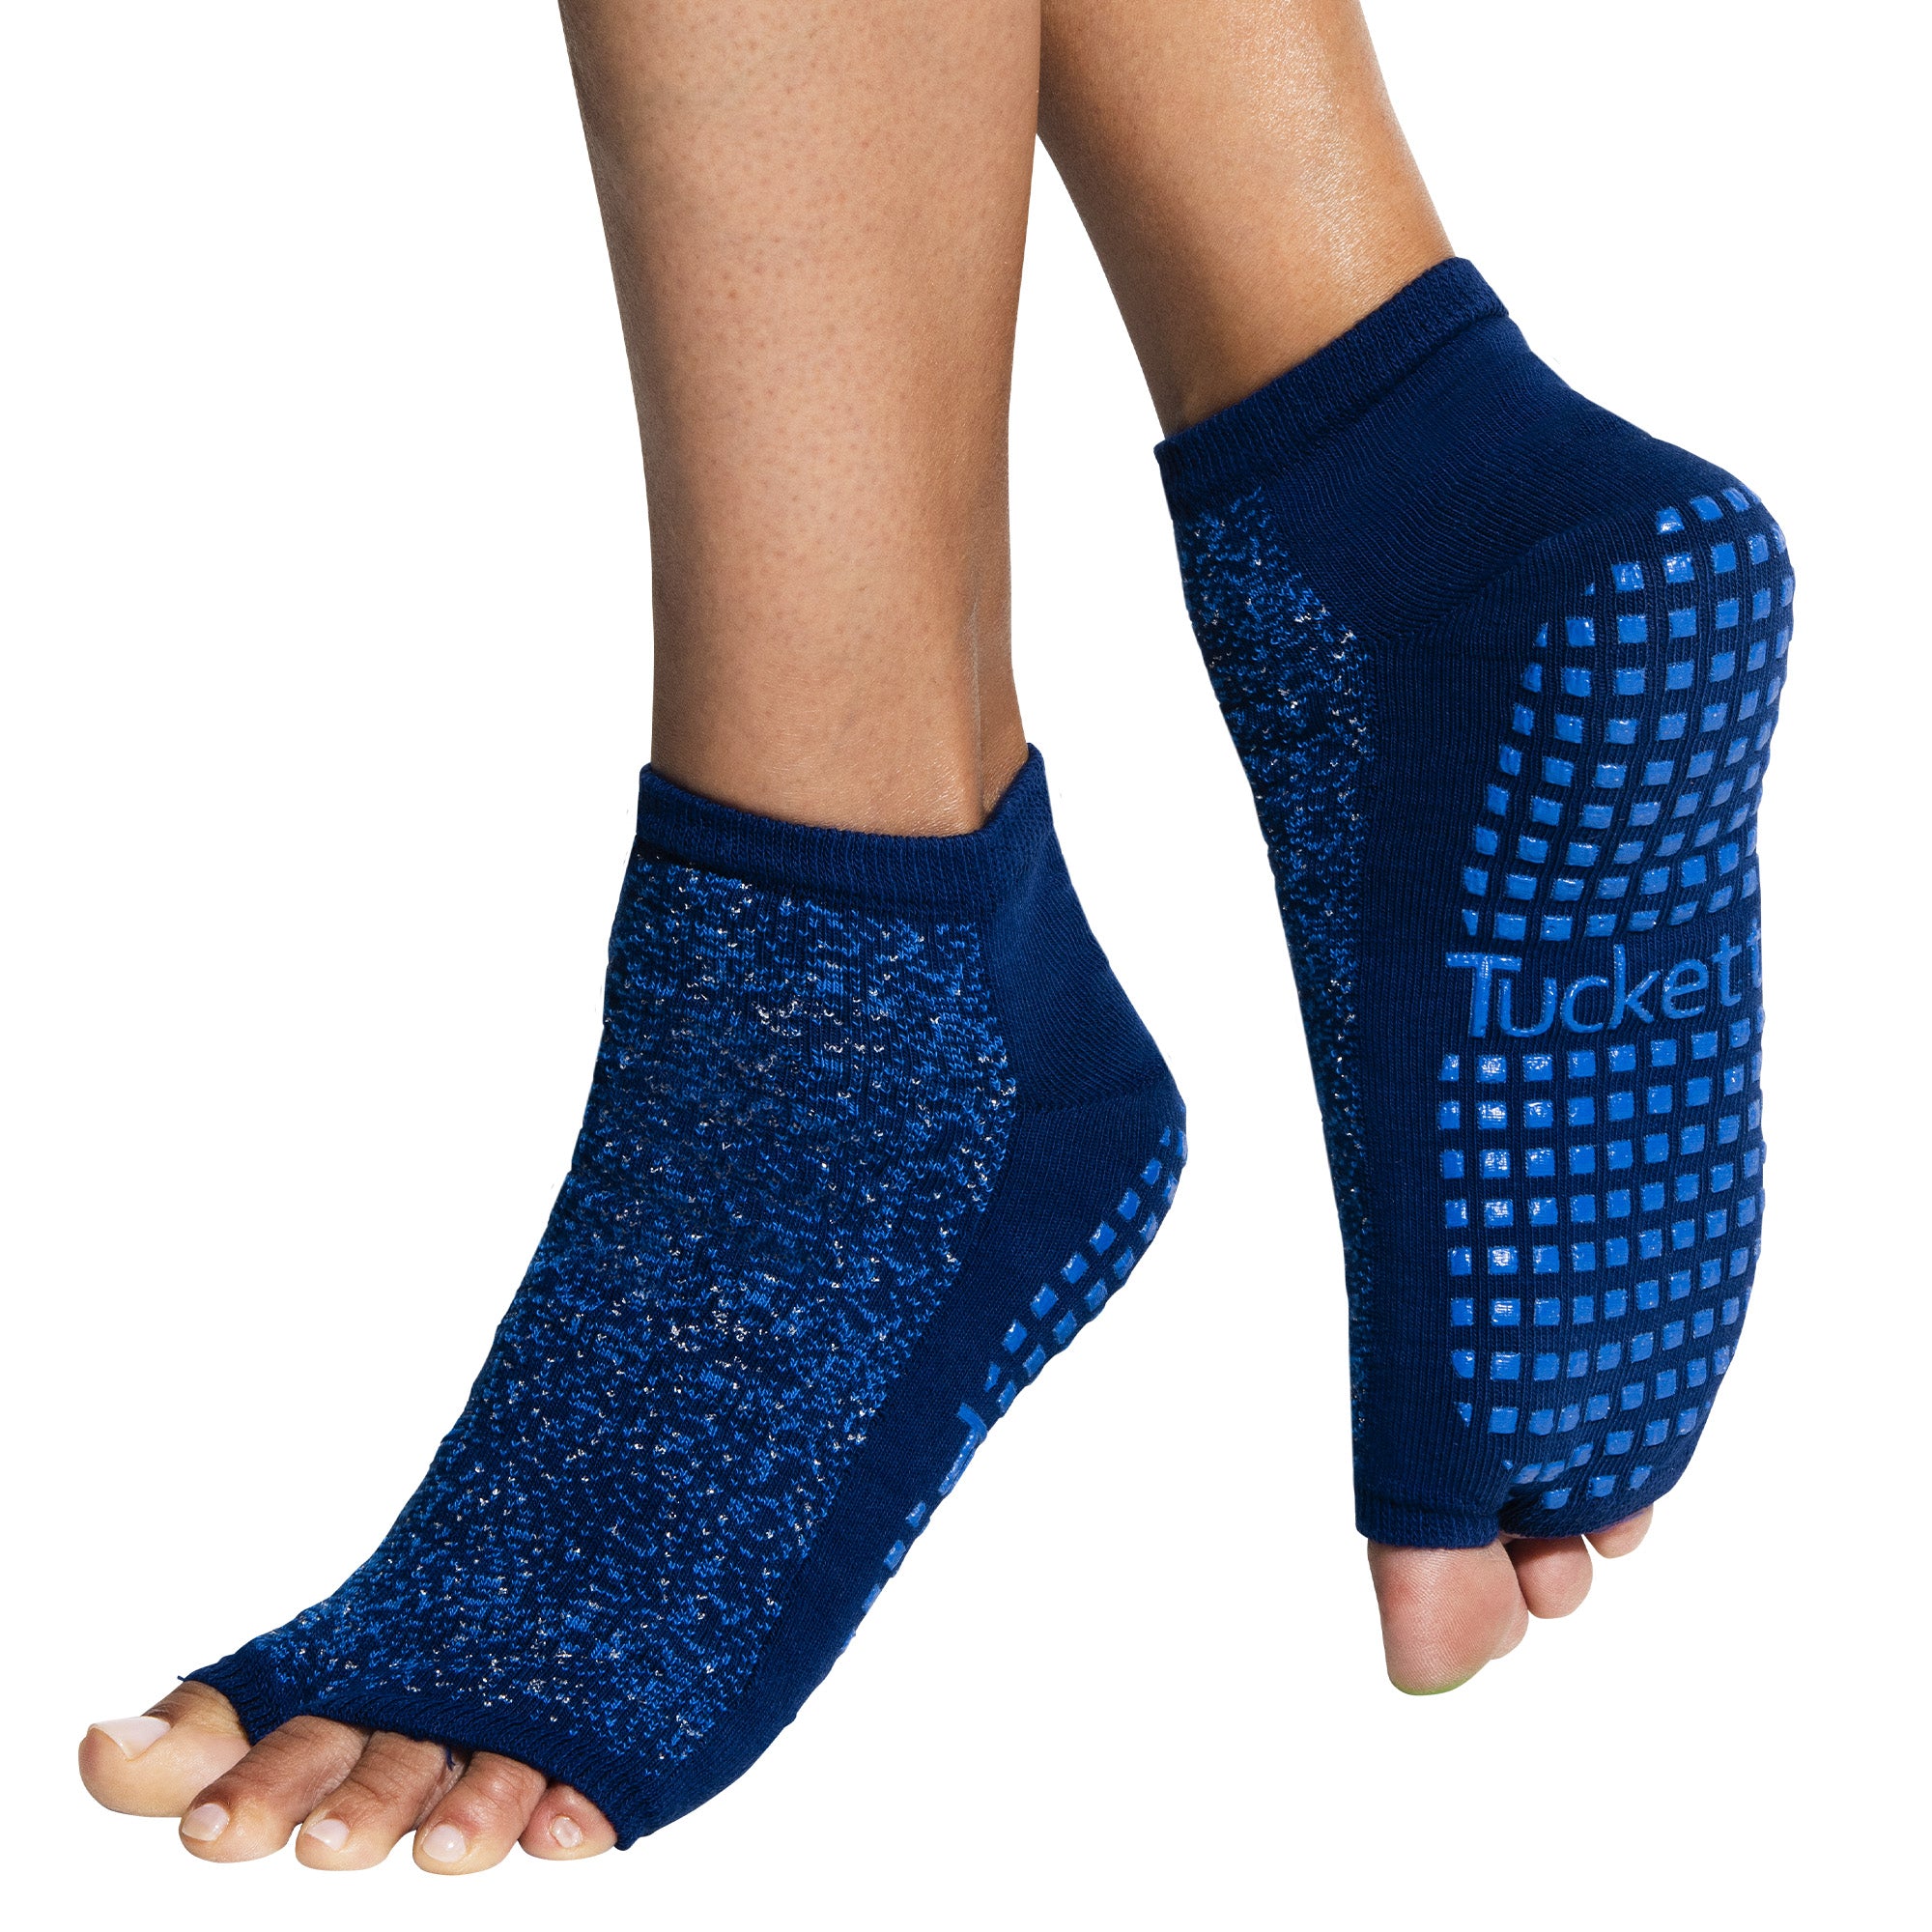 Tucketts - Did you know we have grip socks that fit larger feet